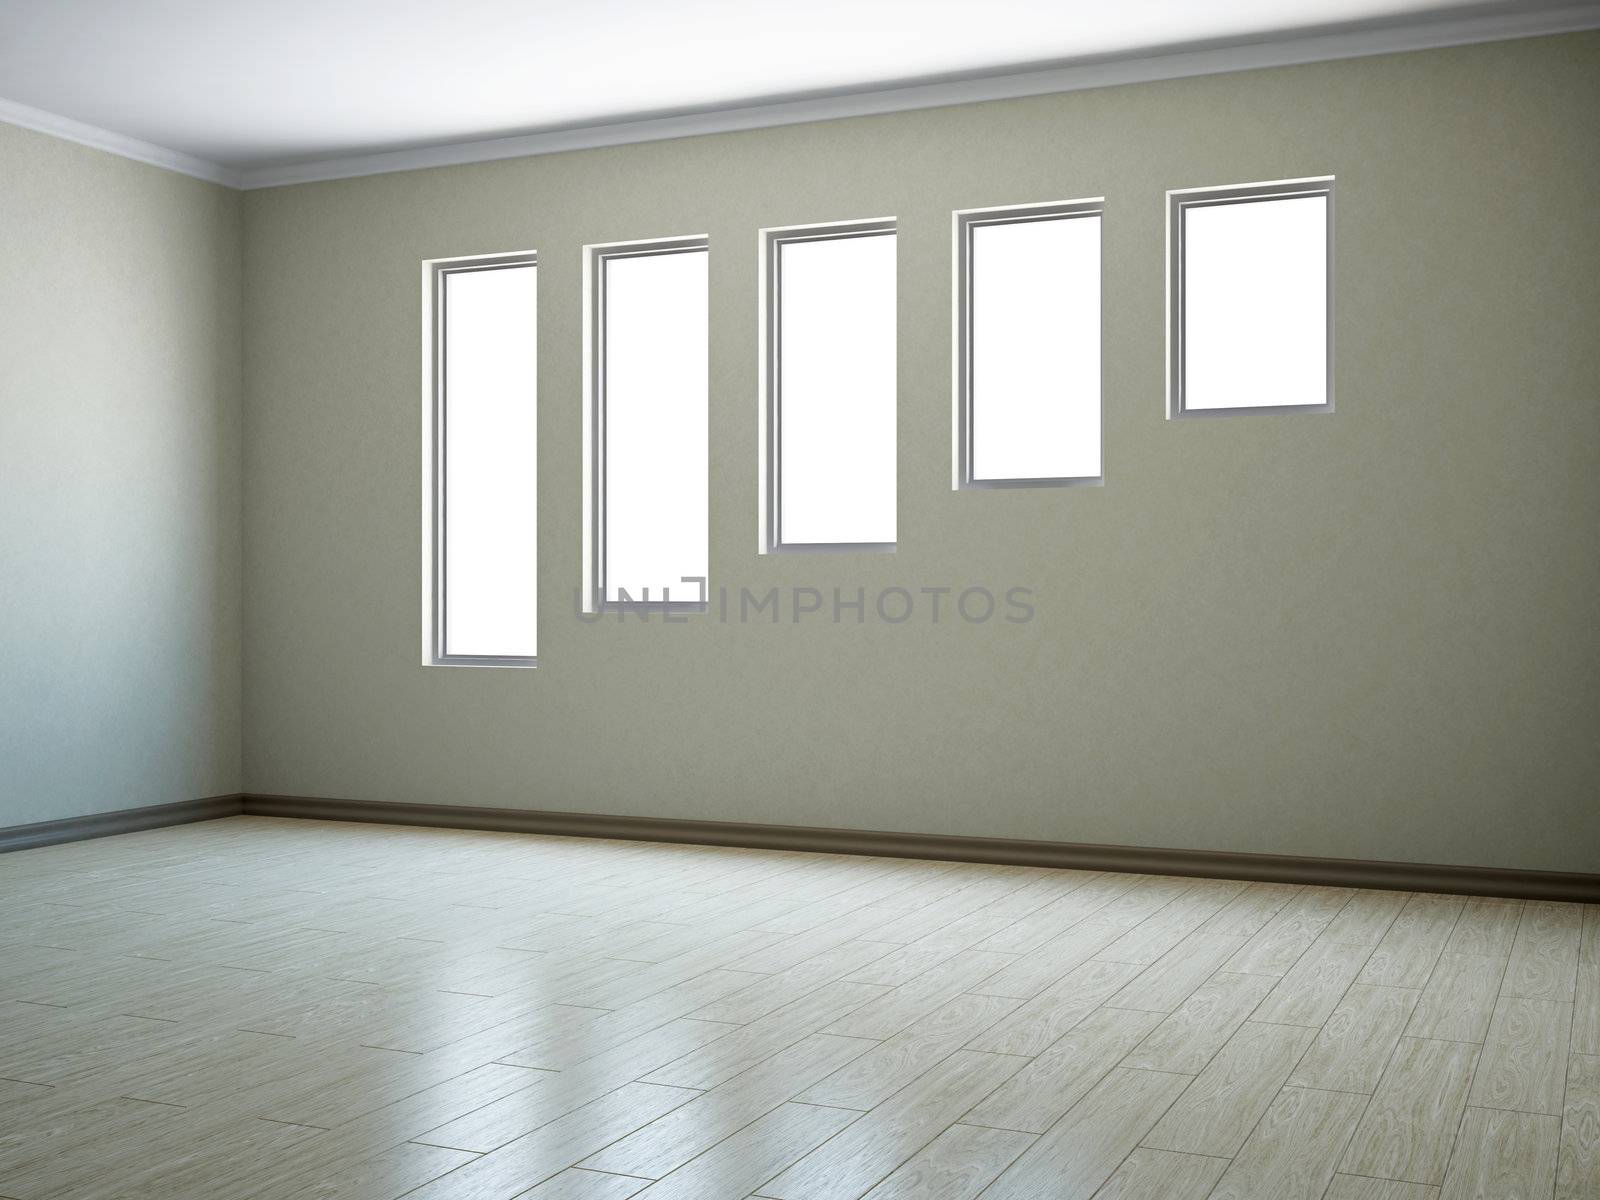 Empty room with windows of the different size